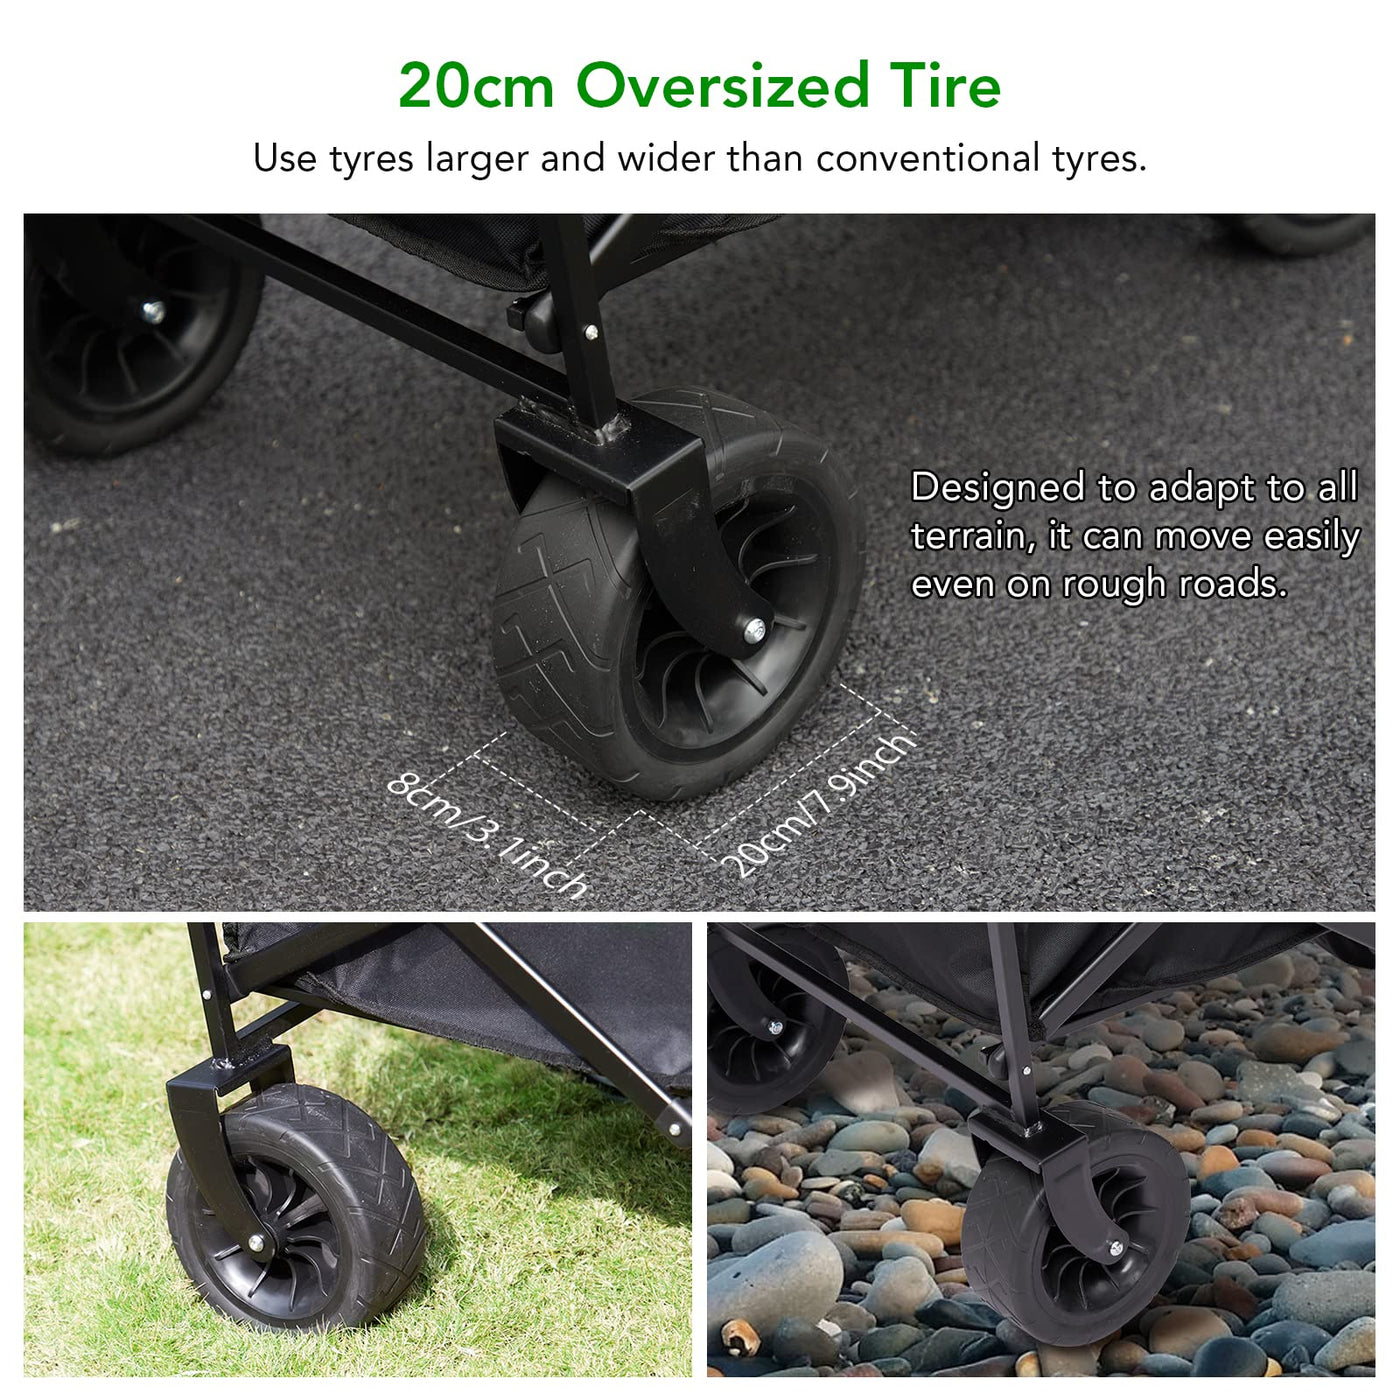 GARVEE 8 inch All Terrain Wheels Collapsible Outdoor Camping Wagon  Iron Folding Table top 4 Plate mats without brakes